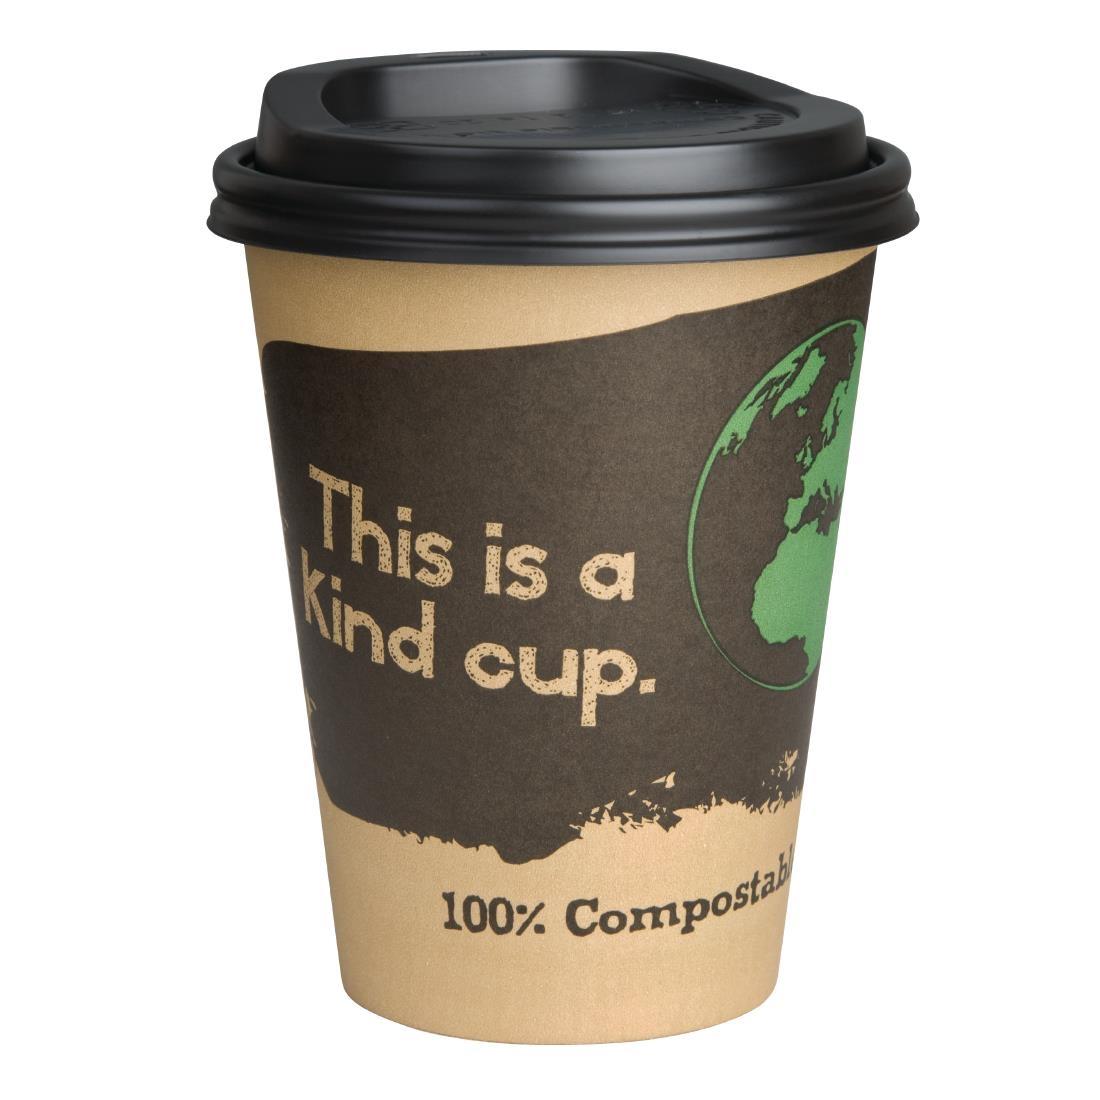 Fiesta Compostable Coffee Cups Single Wall 225ml / 8oz (Pack of 50) - DS057  - 3